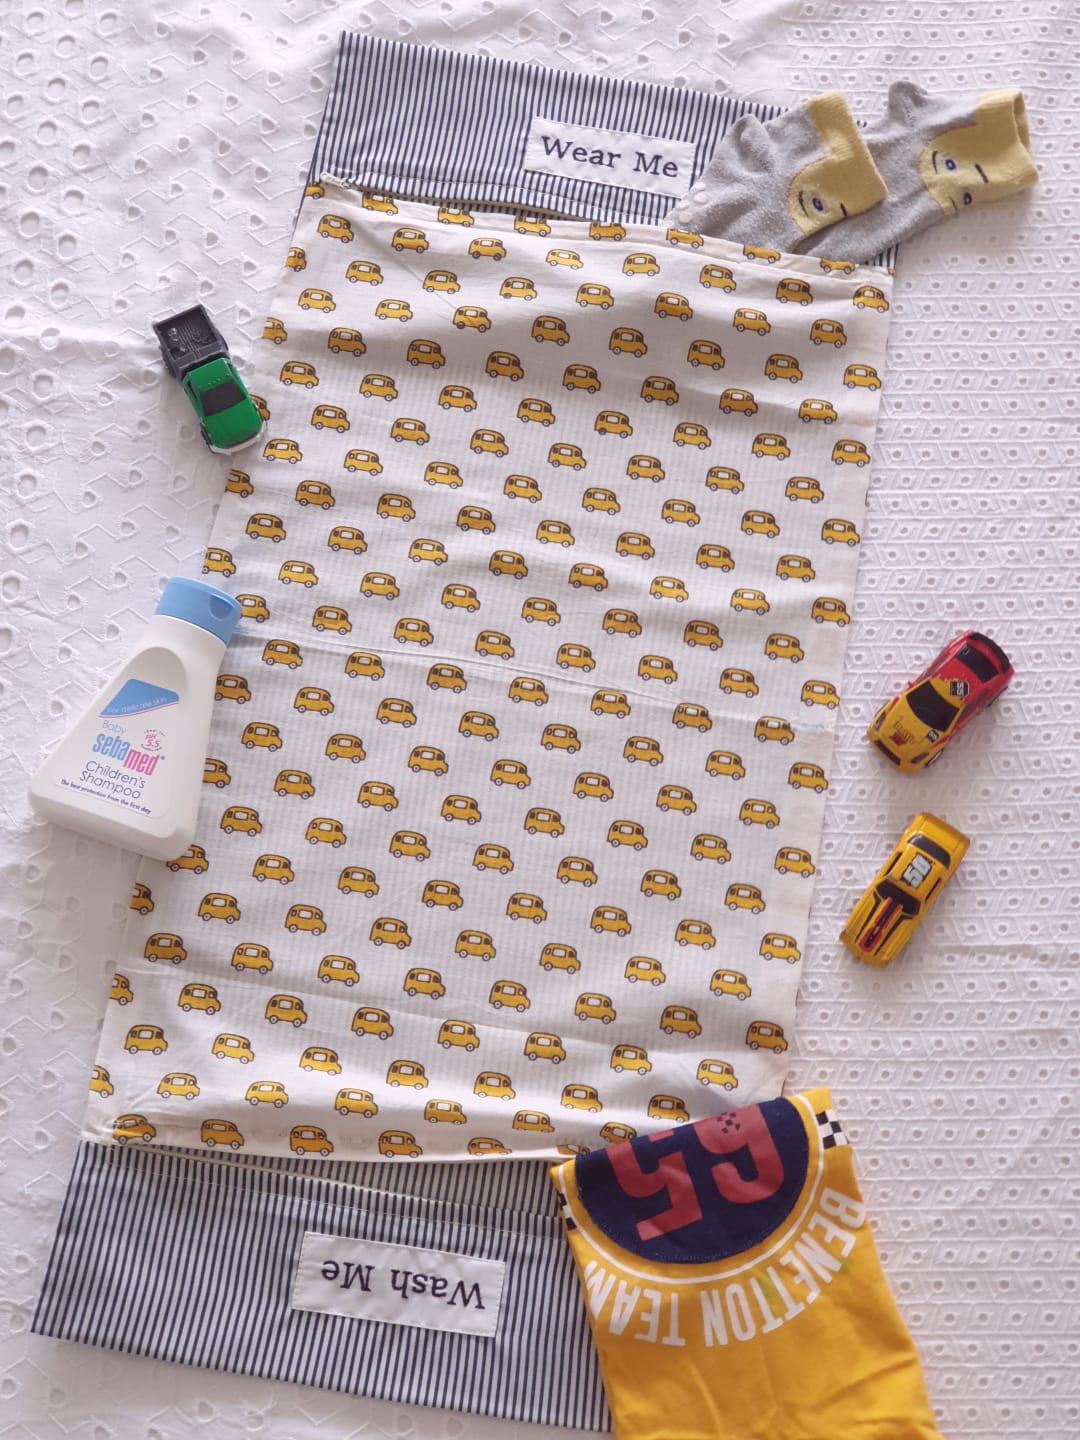 Wear Me & Wash Me - Lingerie/Organiser Pouches - Yellow car themed